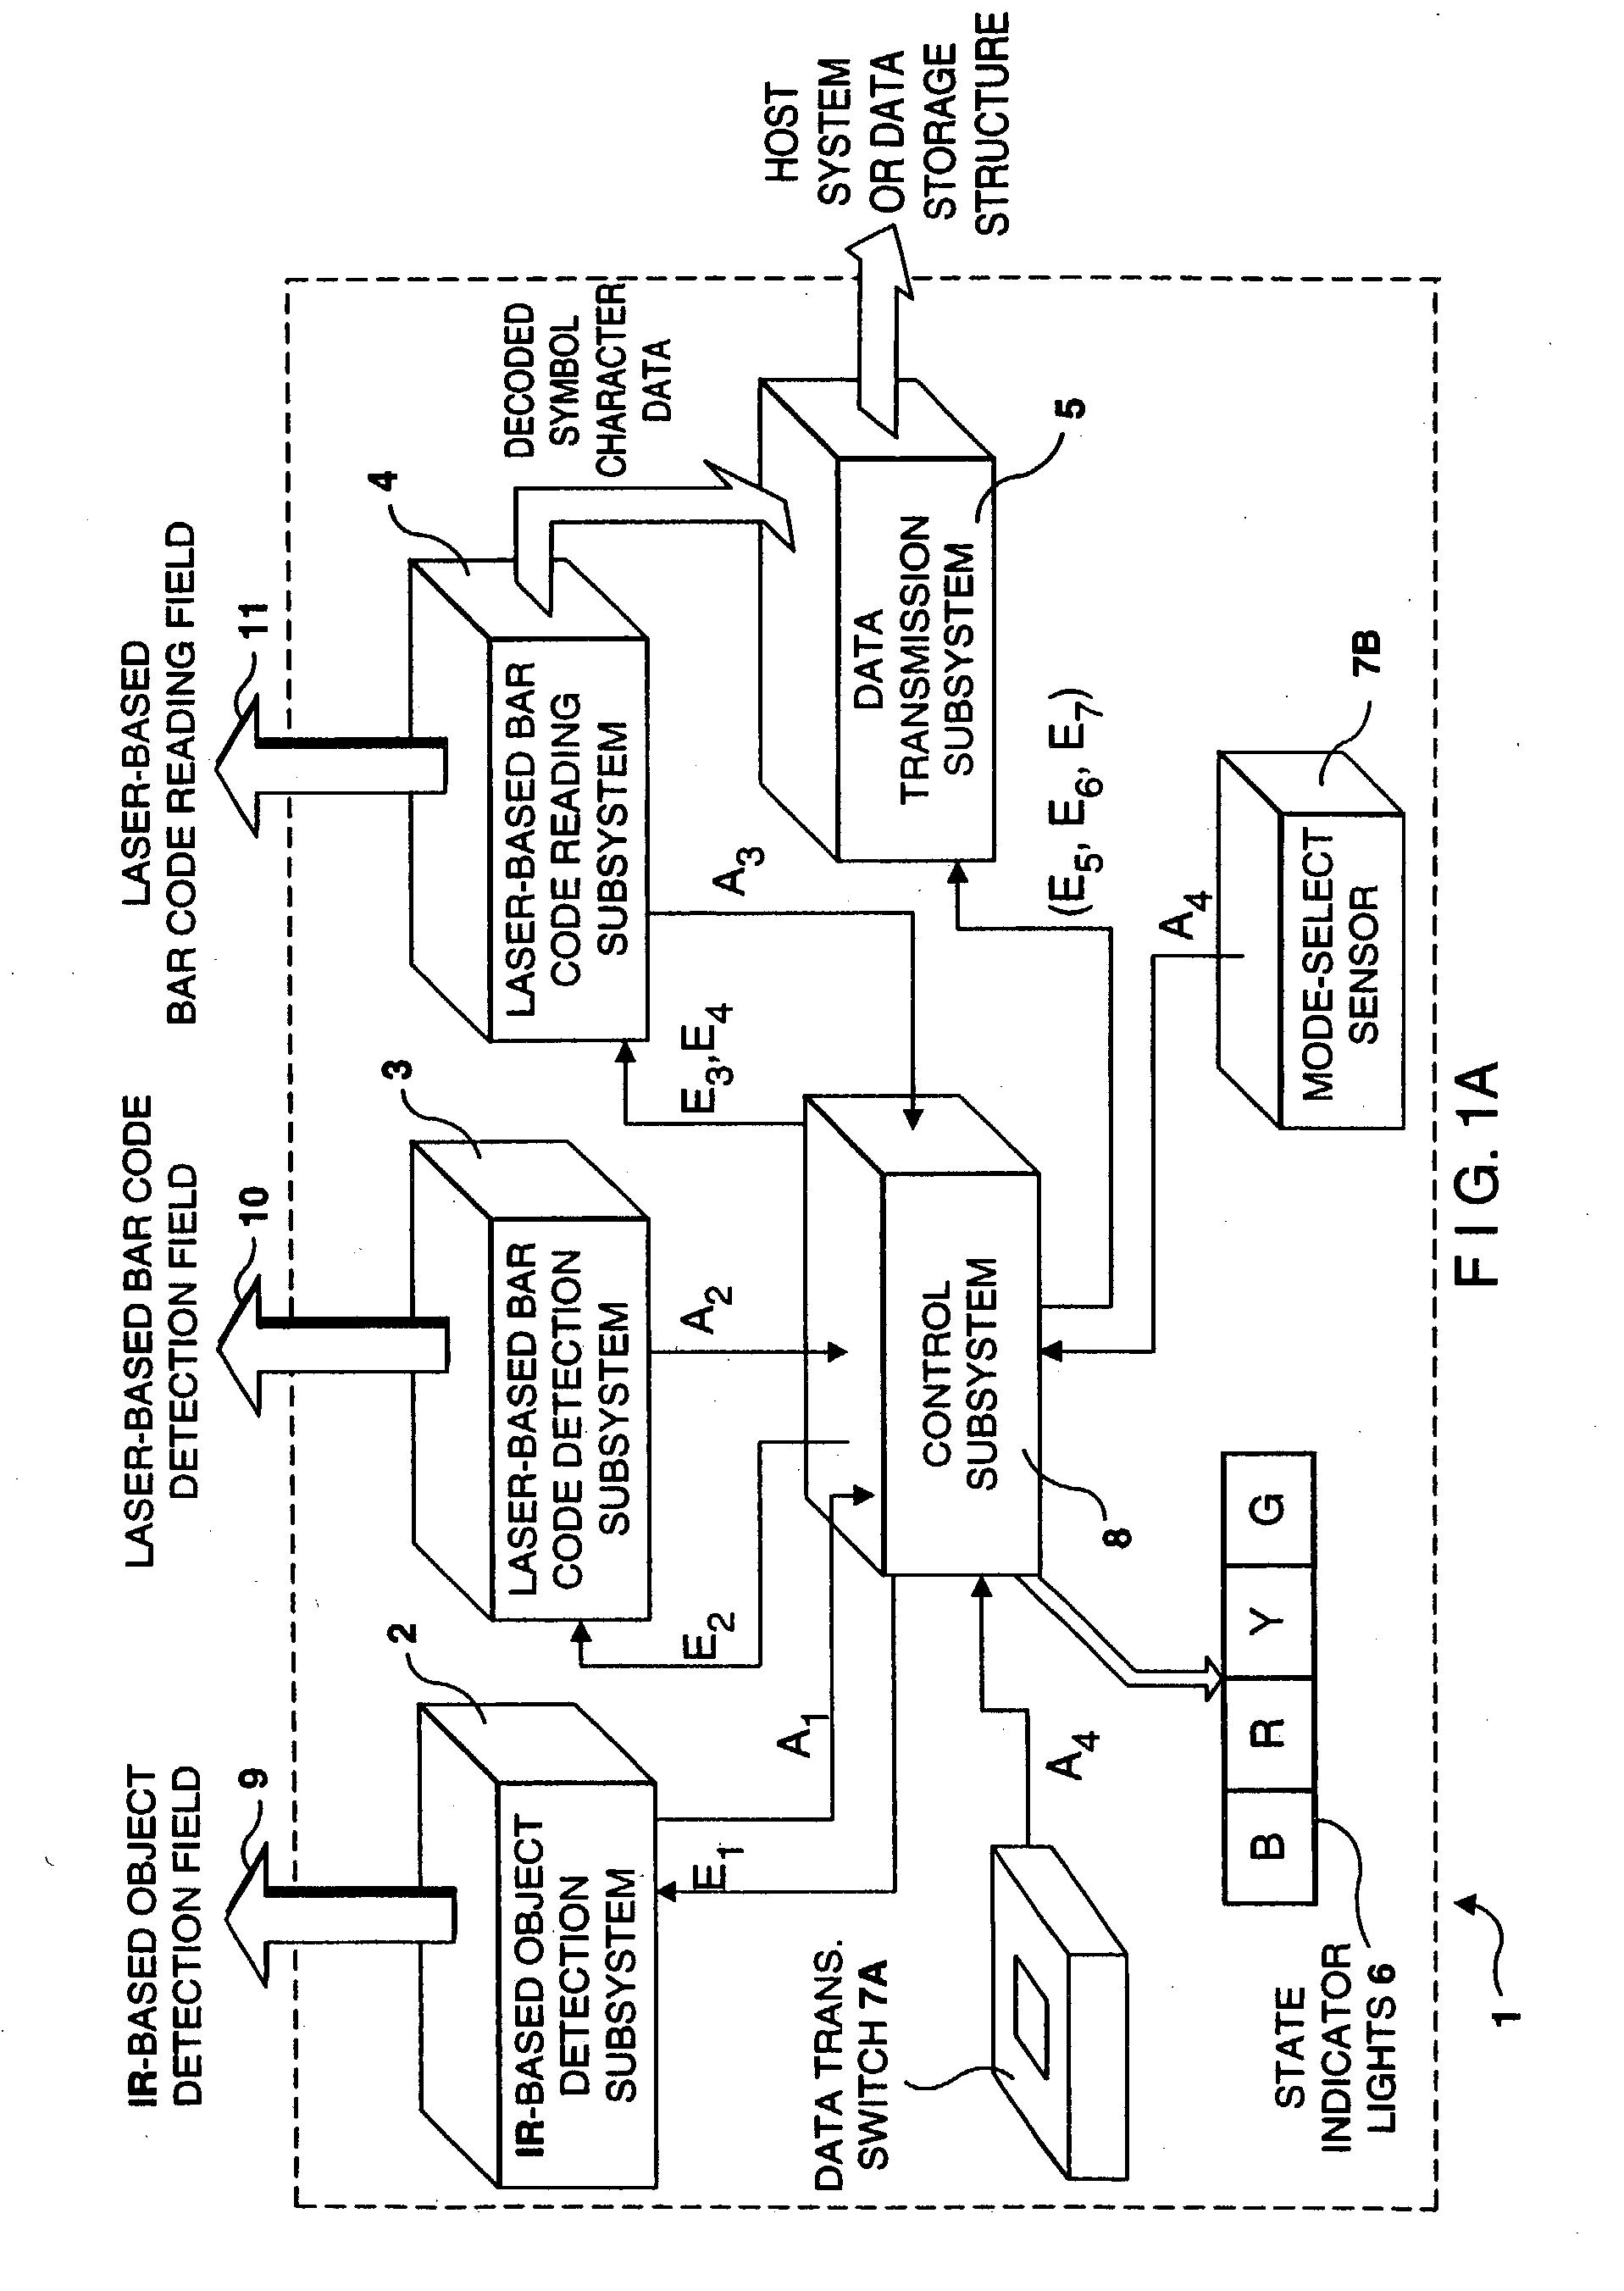 Wireless bar code symbol reading system capable of automatically collecting and storing symbol character data when hand-supportable unit is operated outside of its RF data communication range, and automatically transmitting stored symbol character data when the hand-supportable unit is operated within its RF data communication range